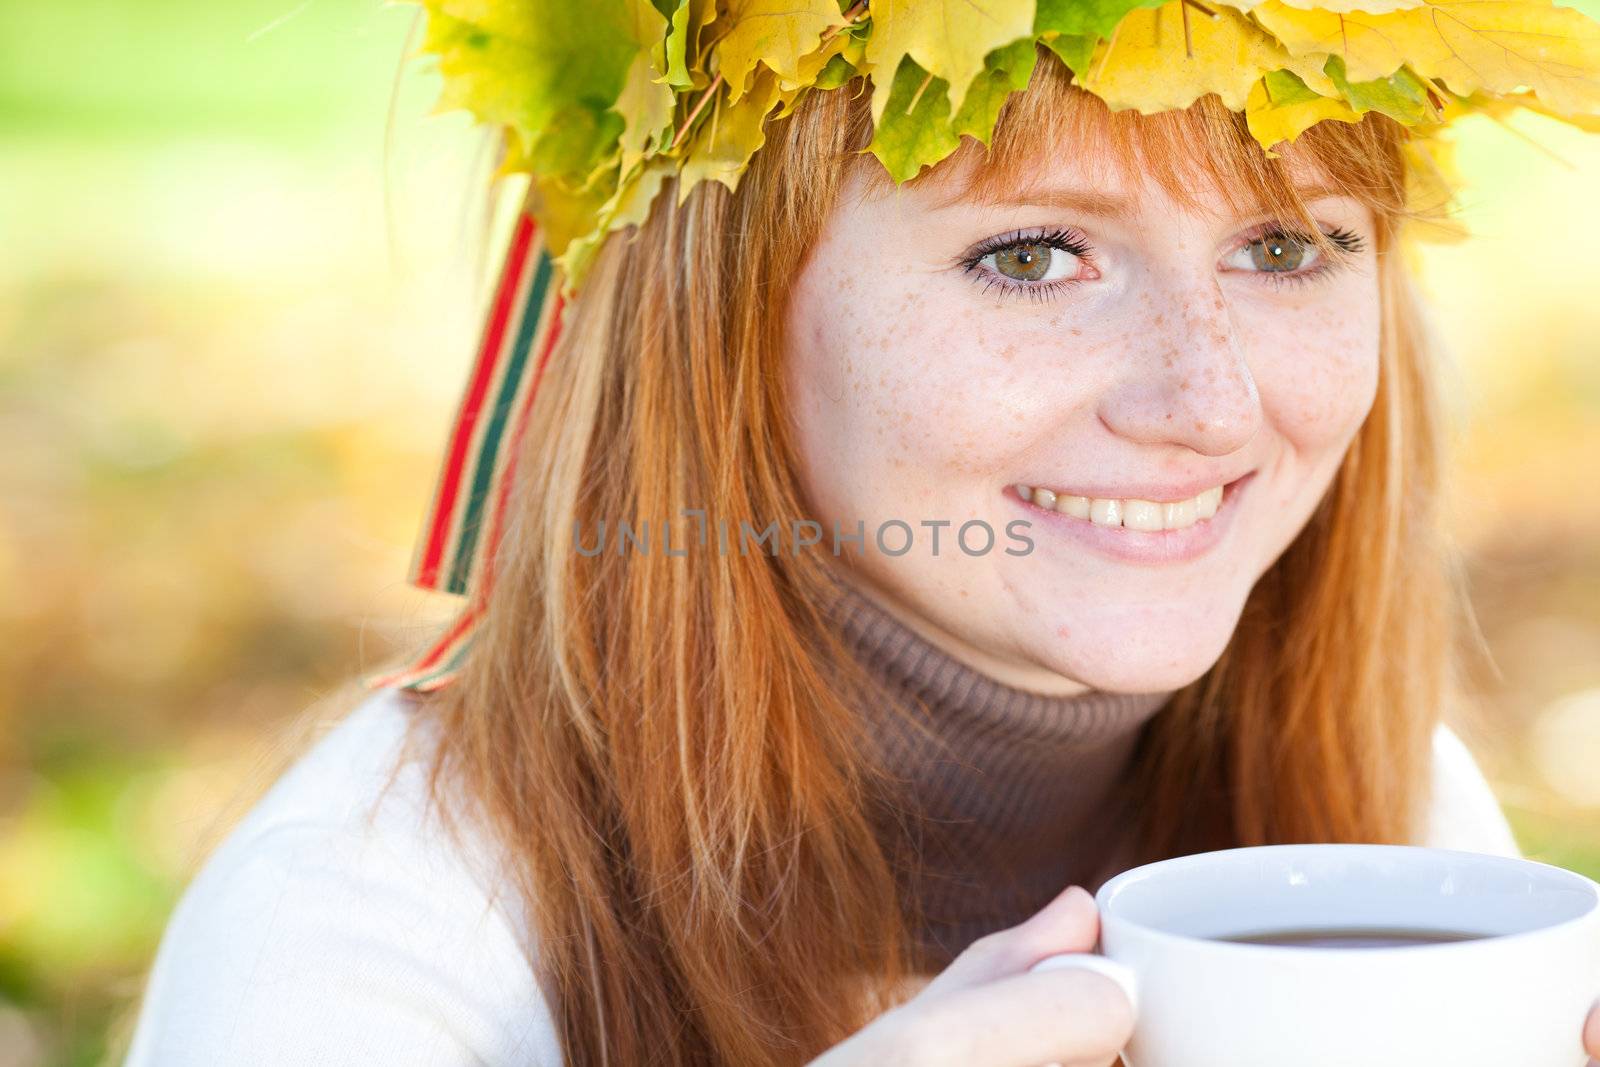 young redhead teenager woman in a wreath of maple leaves with cu by jannyjus